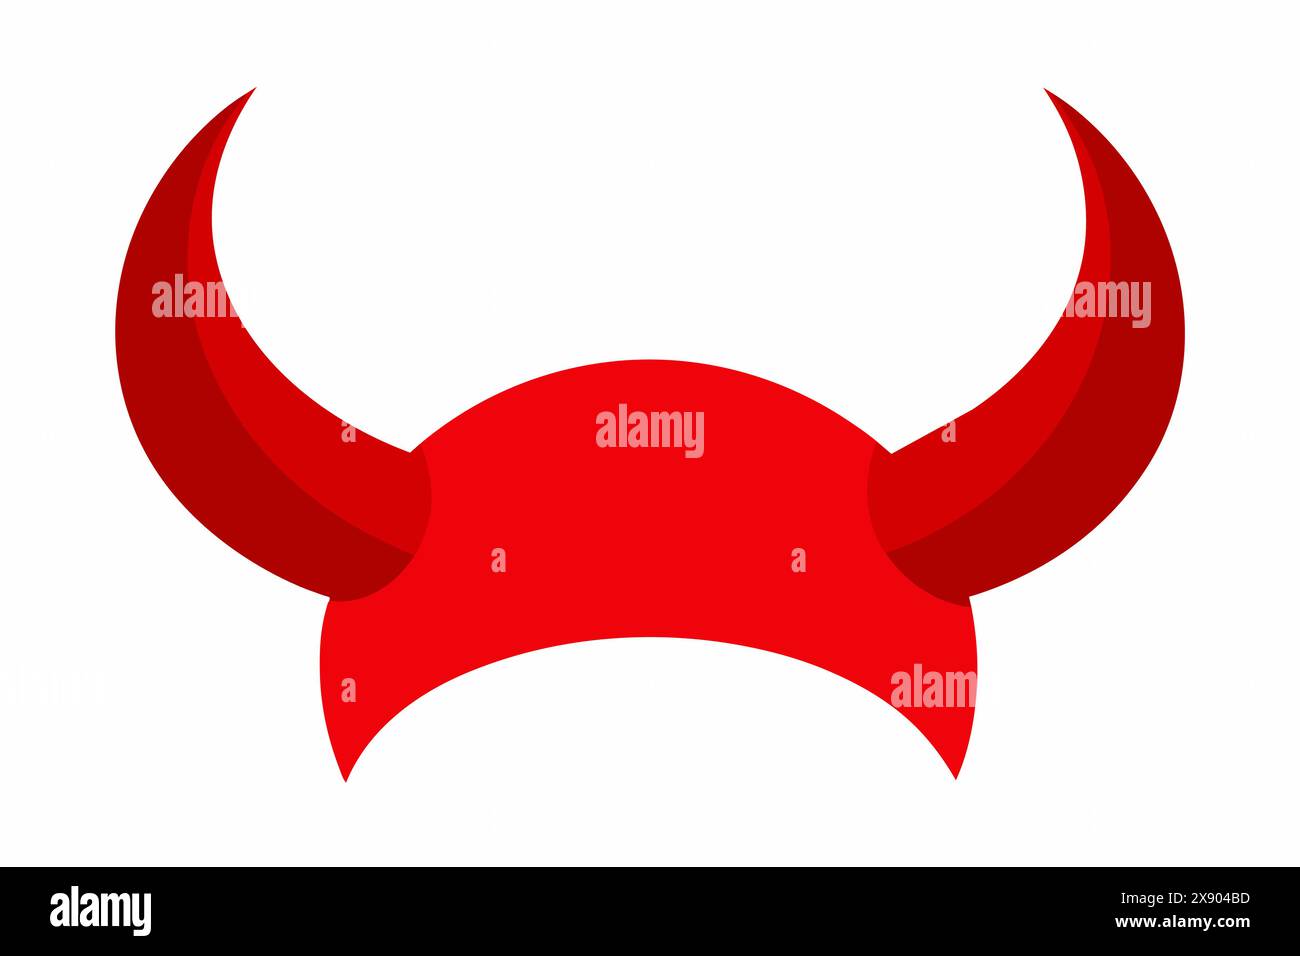 Red devil horns symbol with a curved shape design. Halloween, evil, fantasy, spooky concept. Isolated on white background. Stock Vector